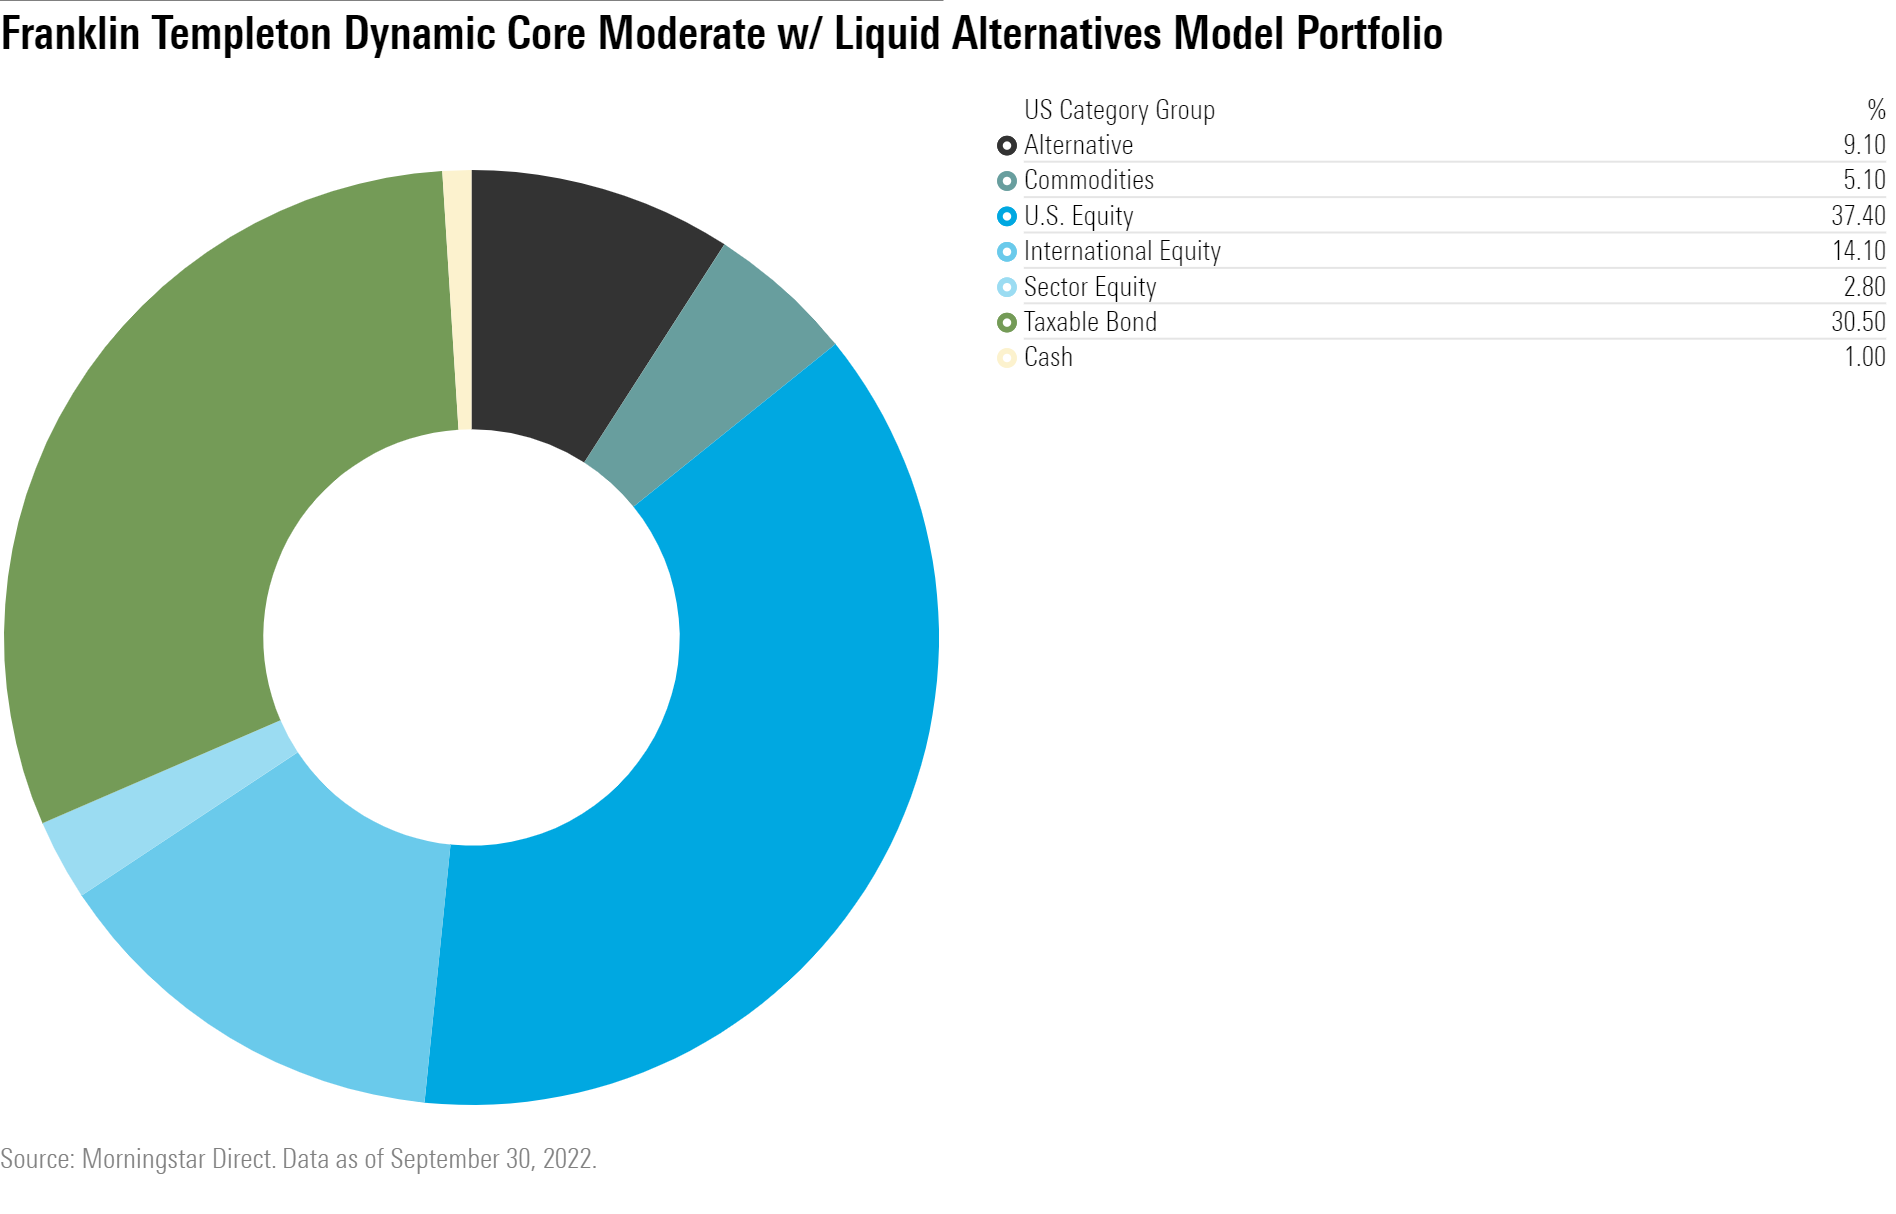 This chart shows the liquid alternatives exposure held within the Franklin Templeton Dynamic Core Moderate w/ Liquid Alternatives Model Portfolio using Morningstar's U.S. category groupings.